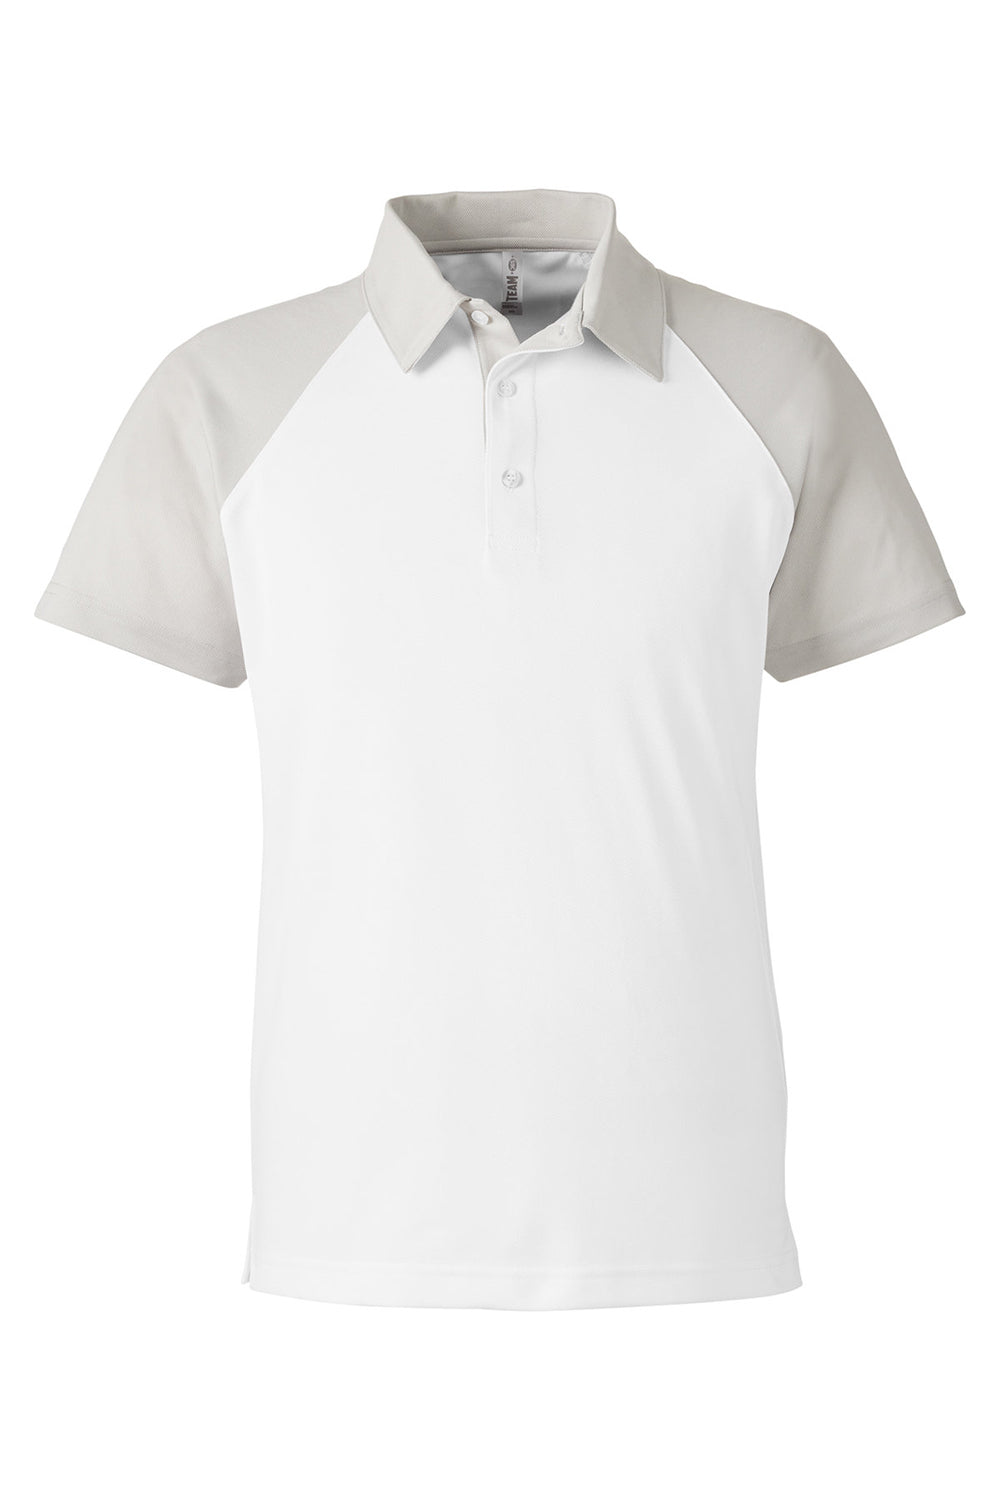 Team 365 TT21C Mens Command Colorblock Moisture Wicking Short Sleeve Polo Shirt White/Silver Grey Flat Front